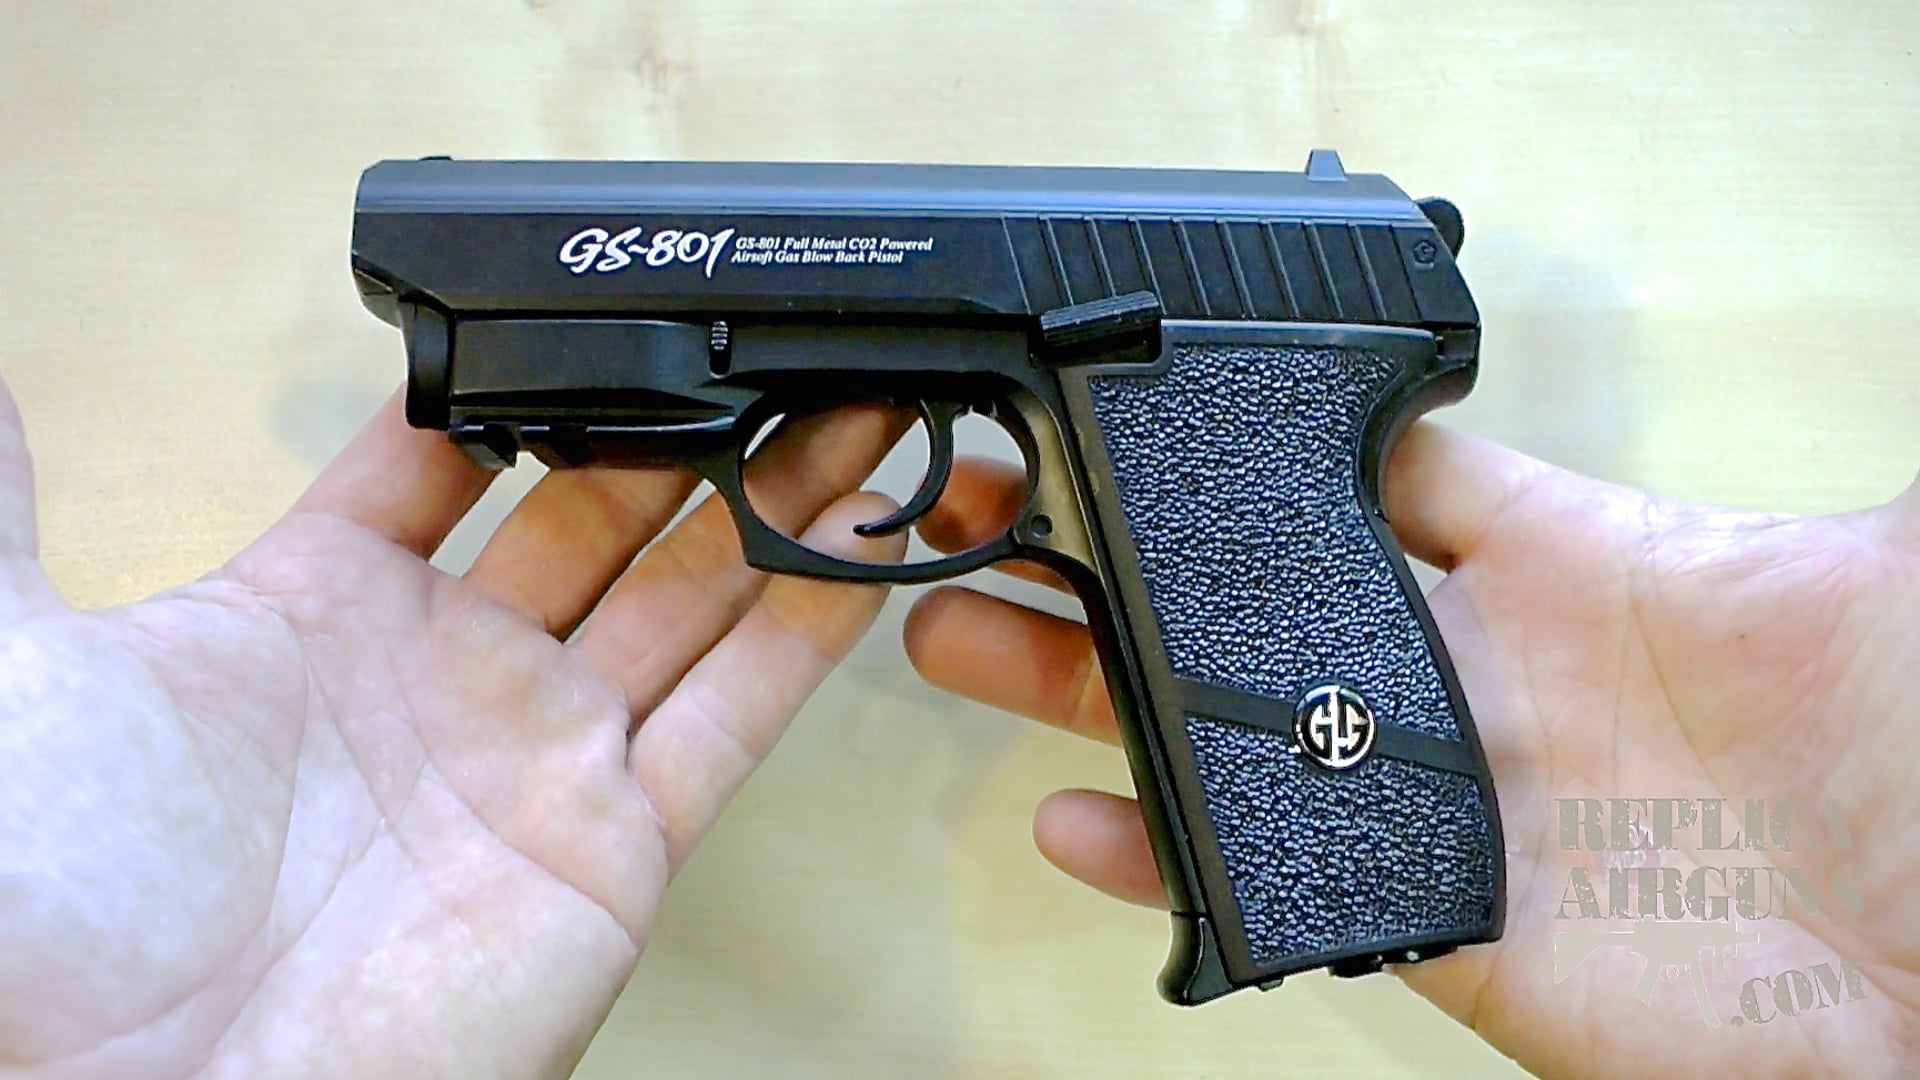 G&G GS-801 CO2 Blowback Airsoft Pistol Table Top Review